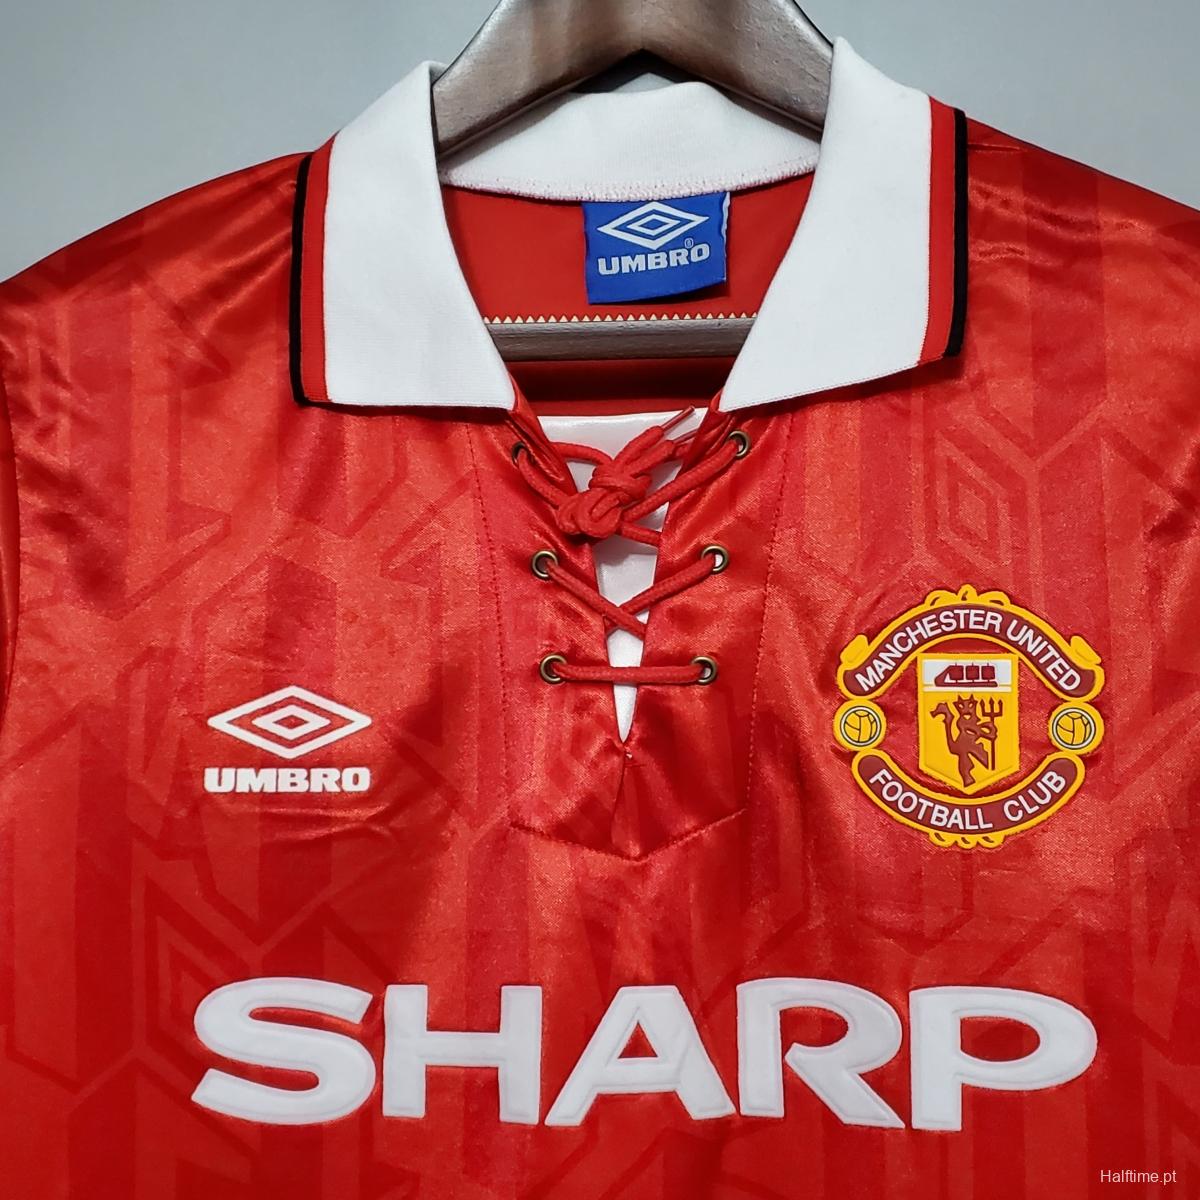 Retro 92/94 Manchester United home Soccer Jersey